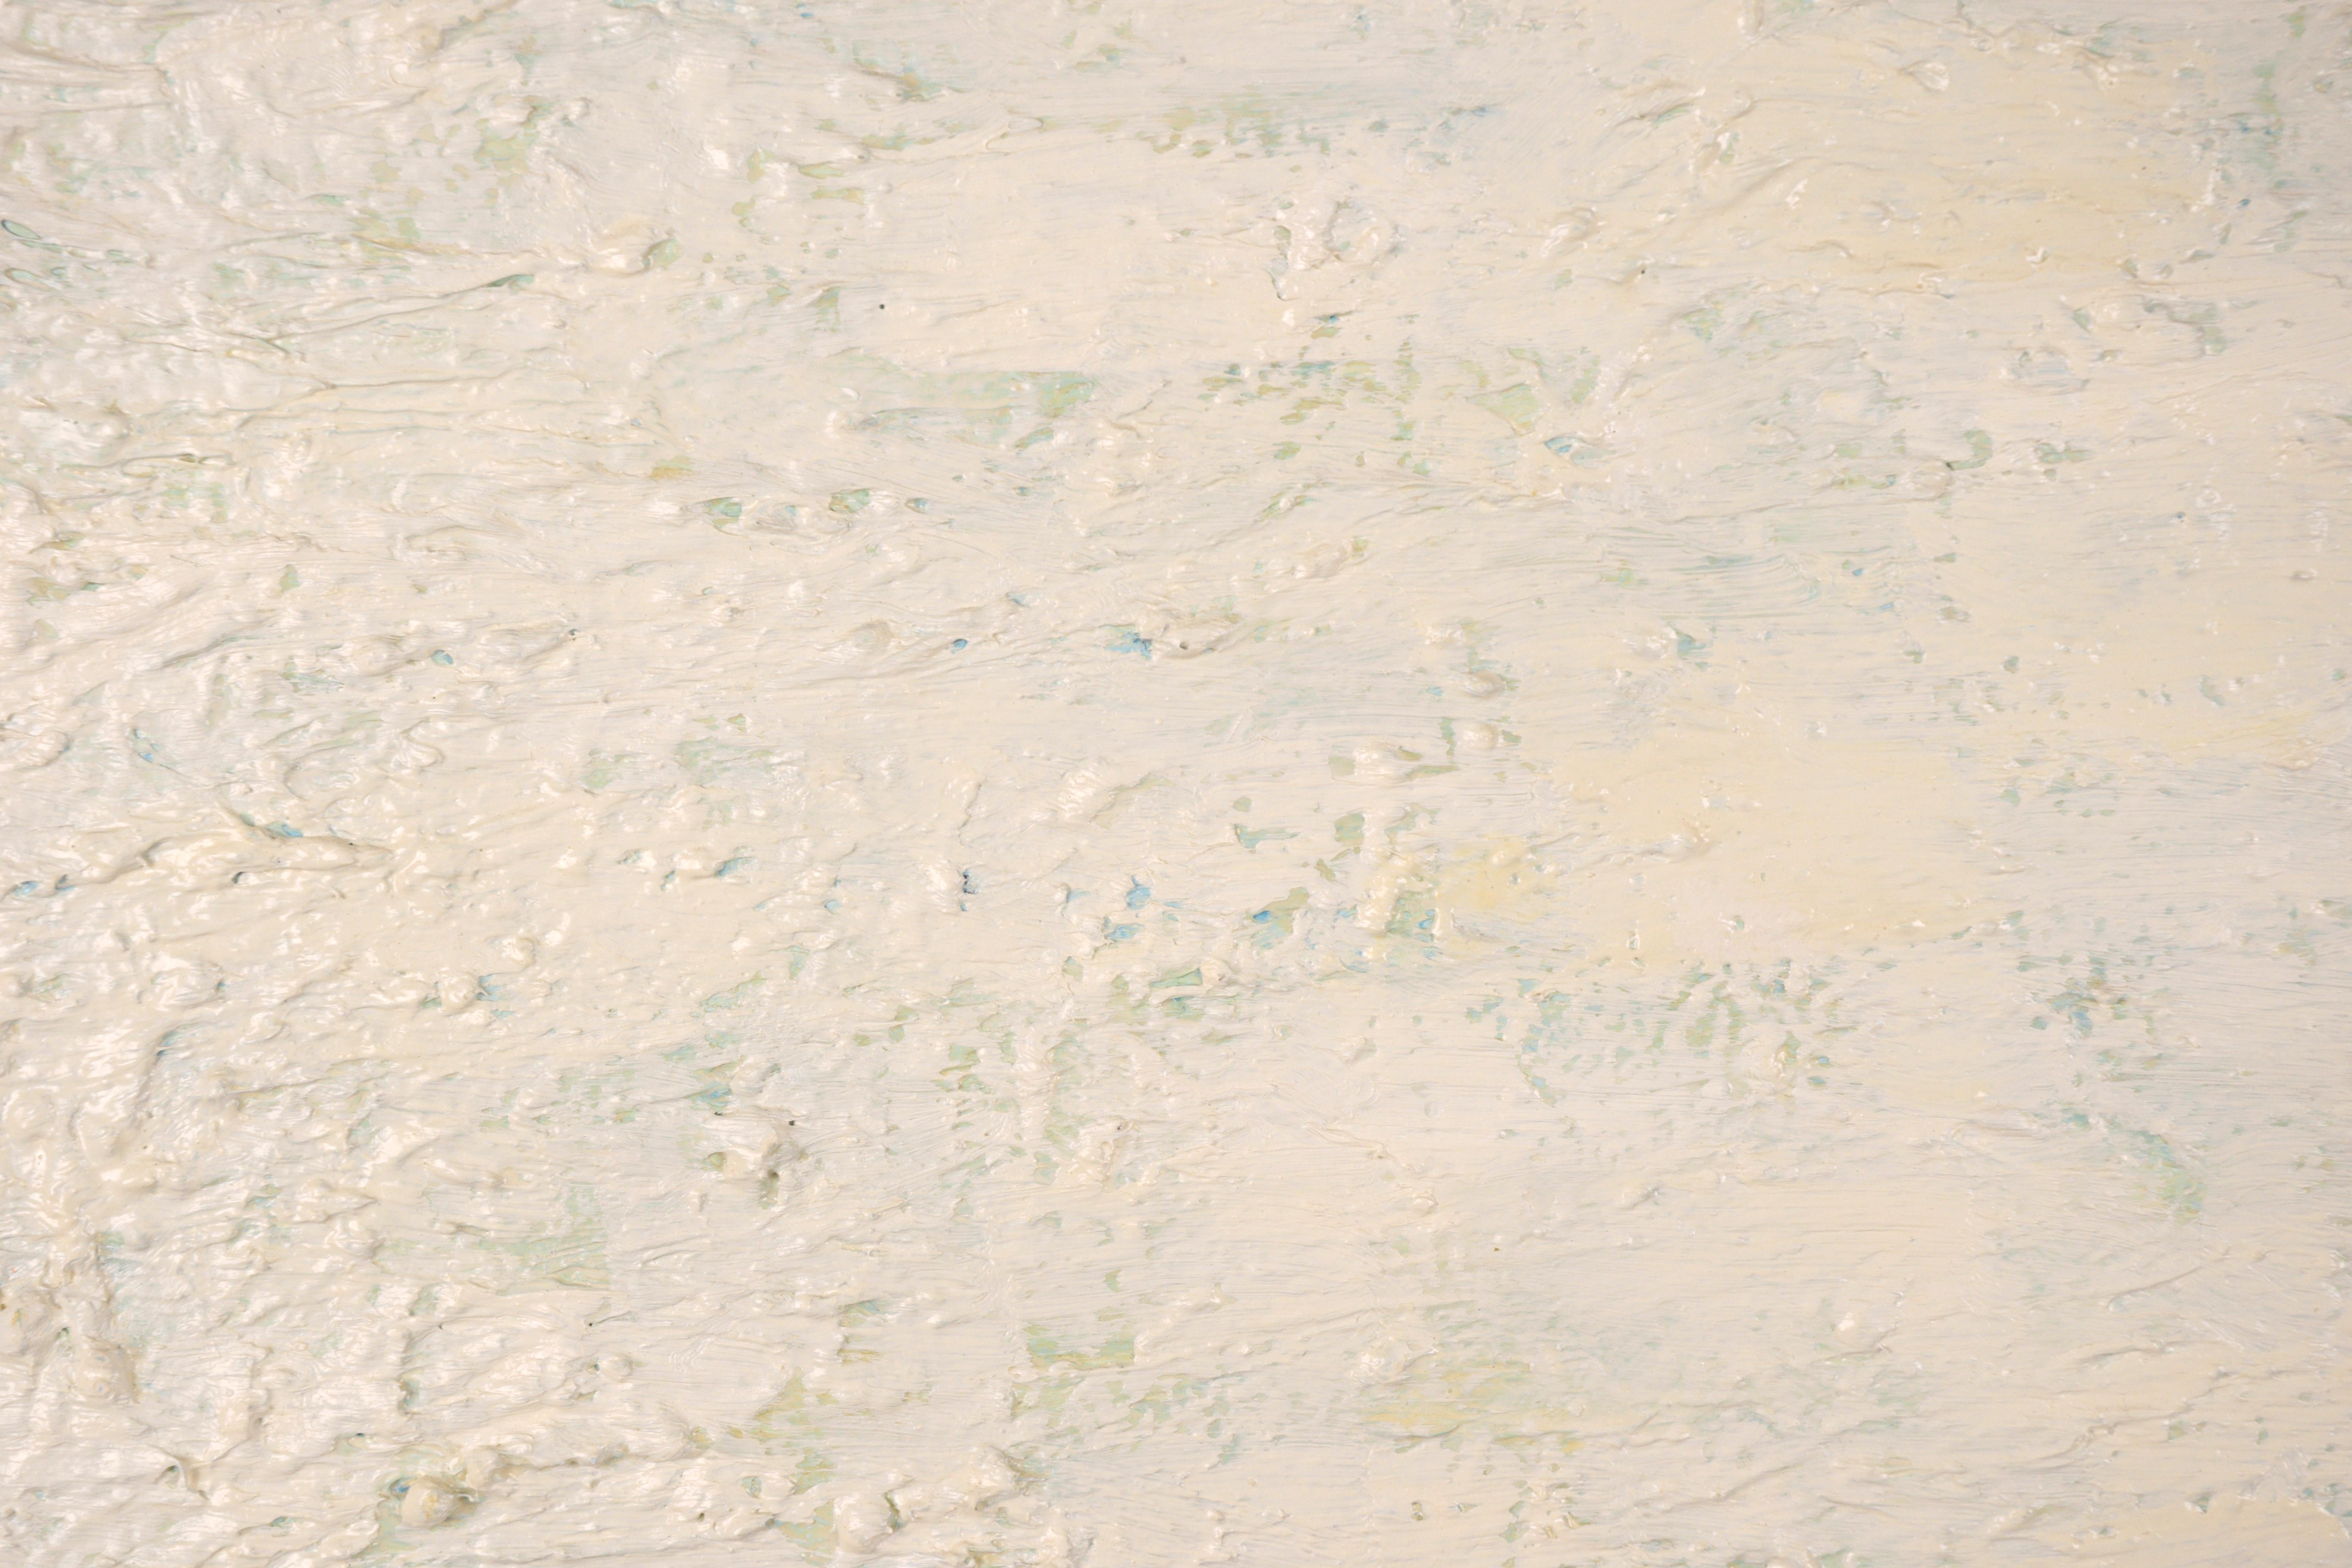 Contemporary Abstract Colorfield Landscape in Cream & Green - Painting by Michael Pauker 